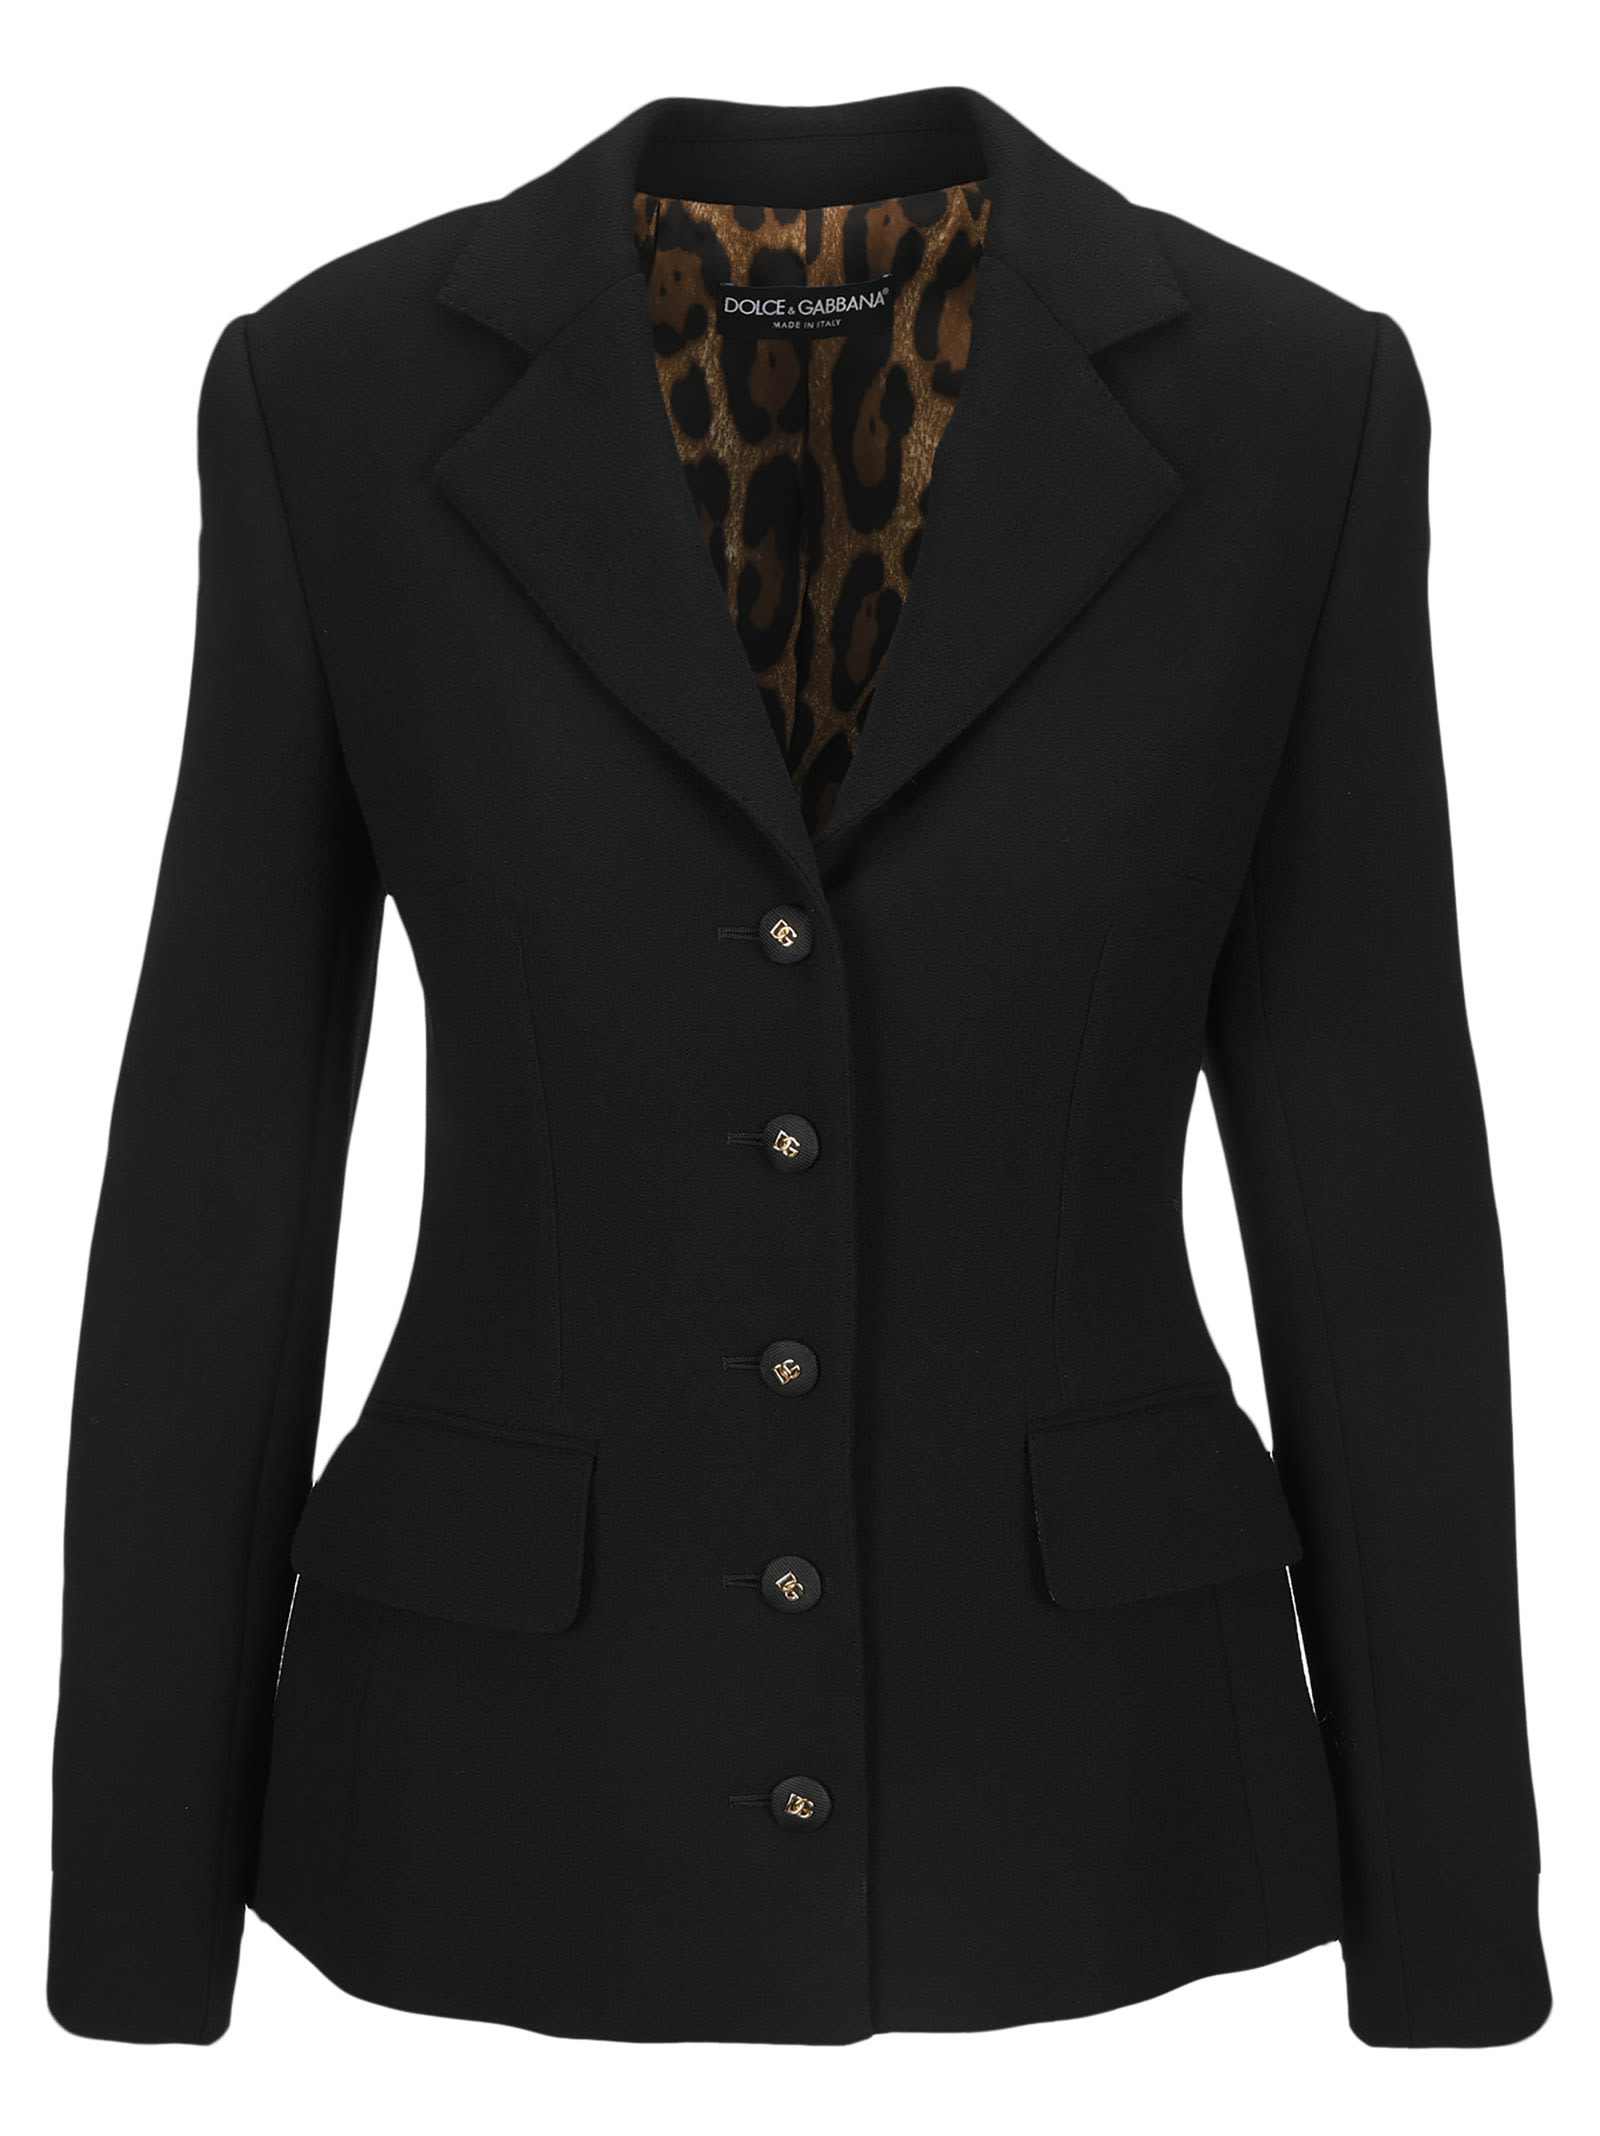 Dolce & Gabbana Dolce & gabbana Single-breasted Wool Crepe Dolce Jacket With Dg Buttons